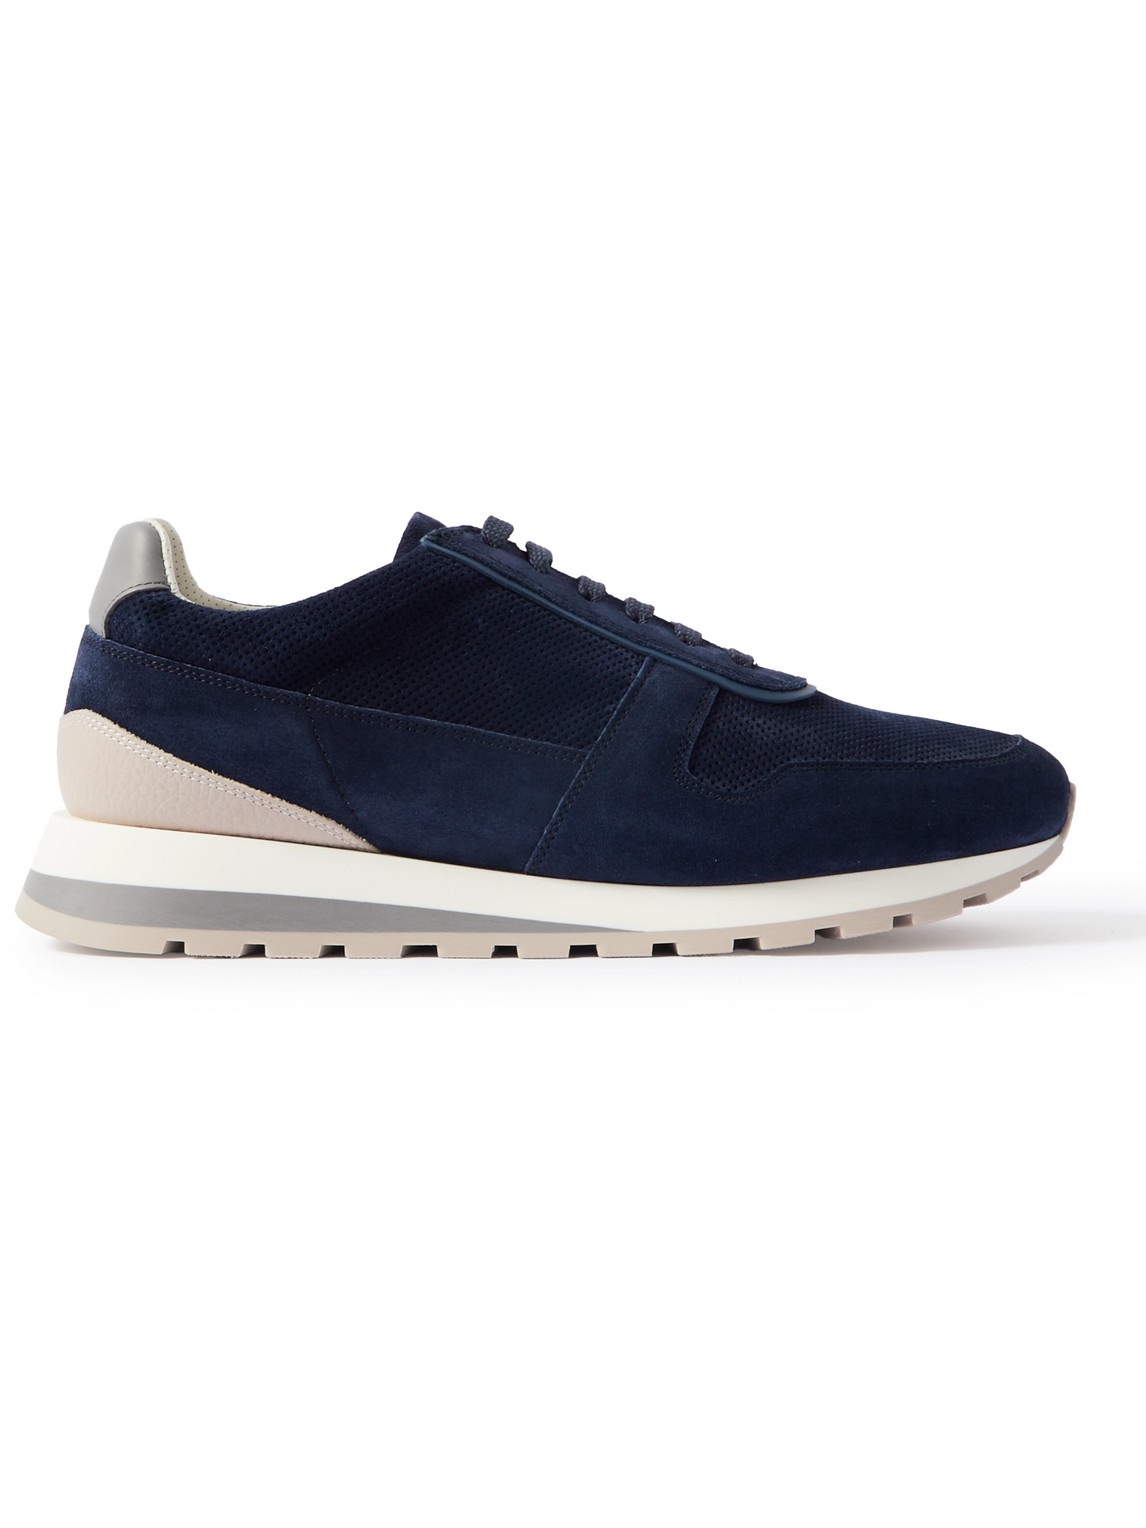 Brunello Cucinelli Olimpo Leather-trimmed Perforated Suede Sneakers In Blue